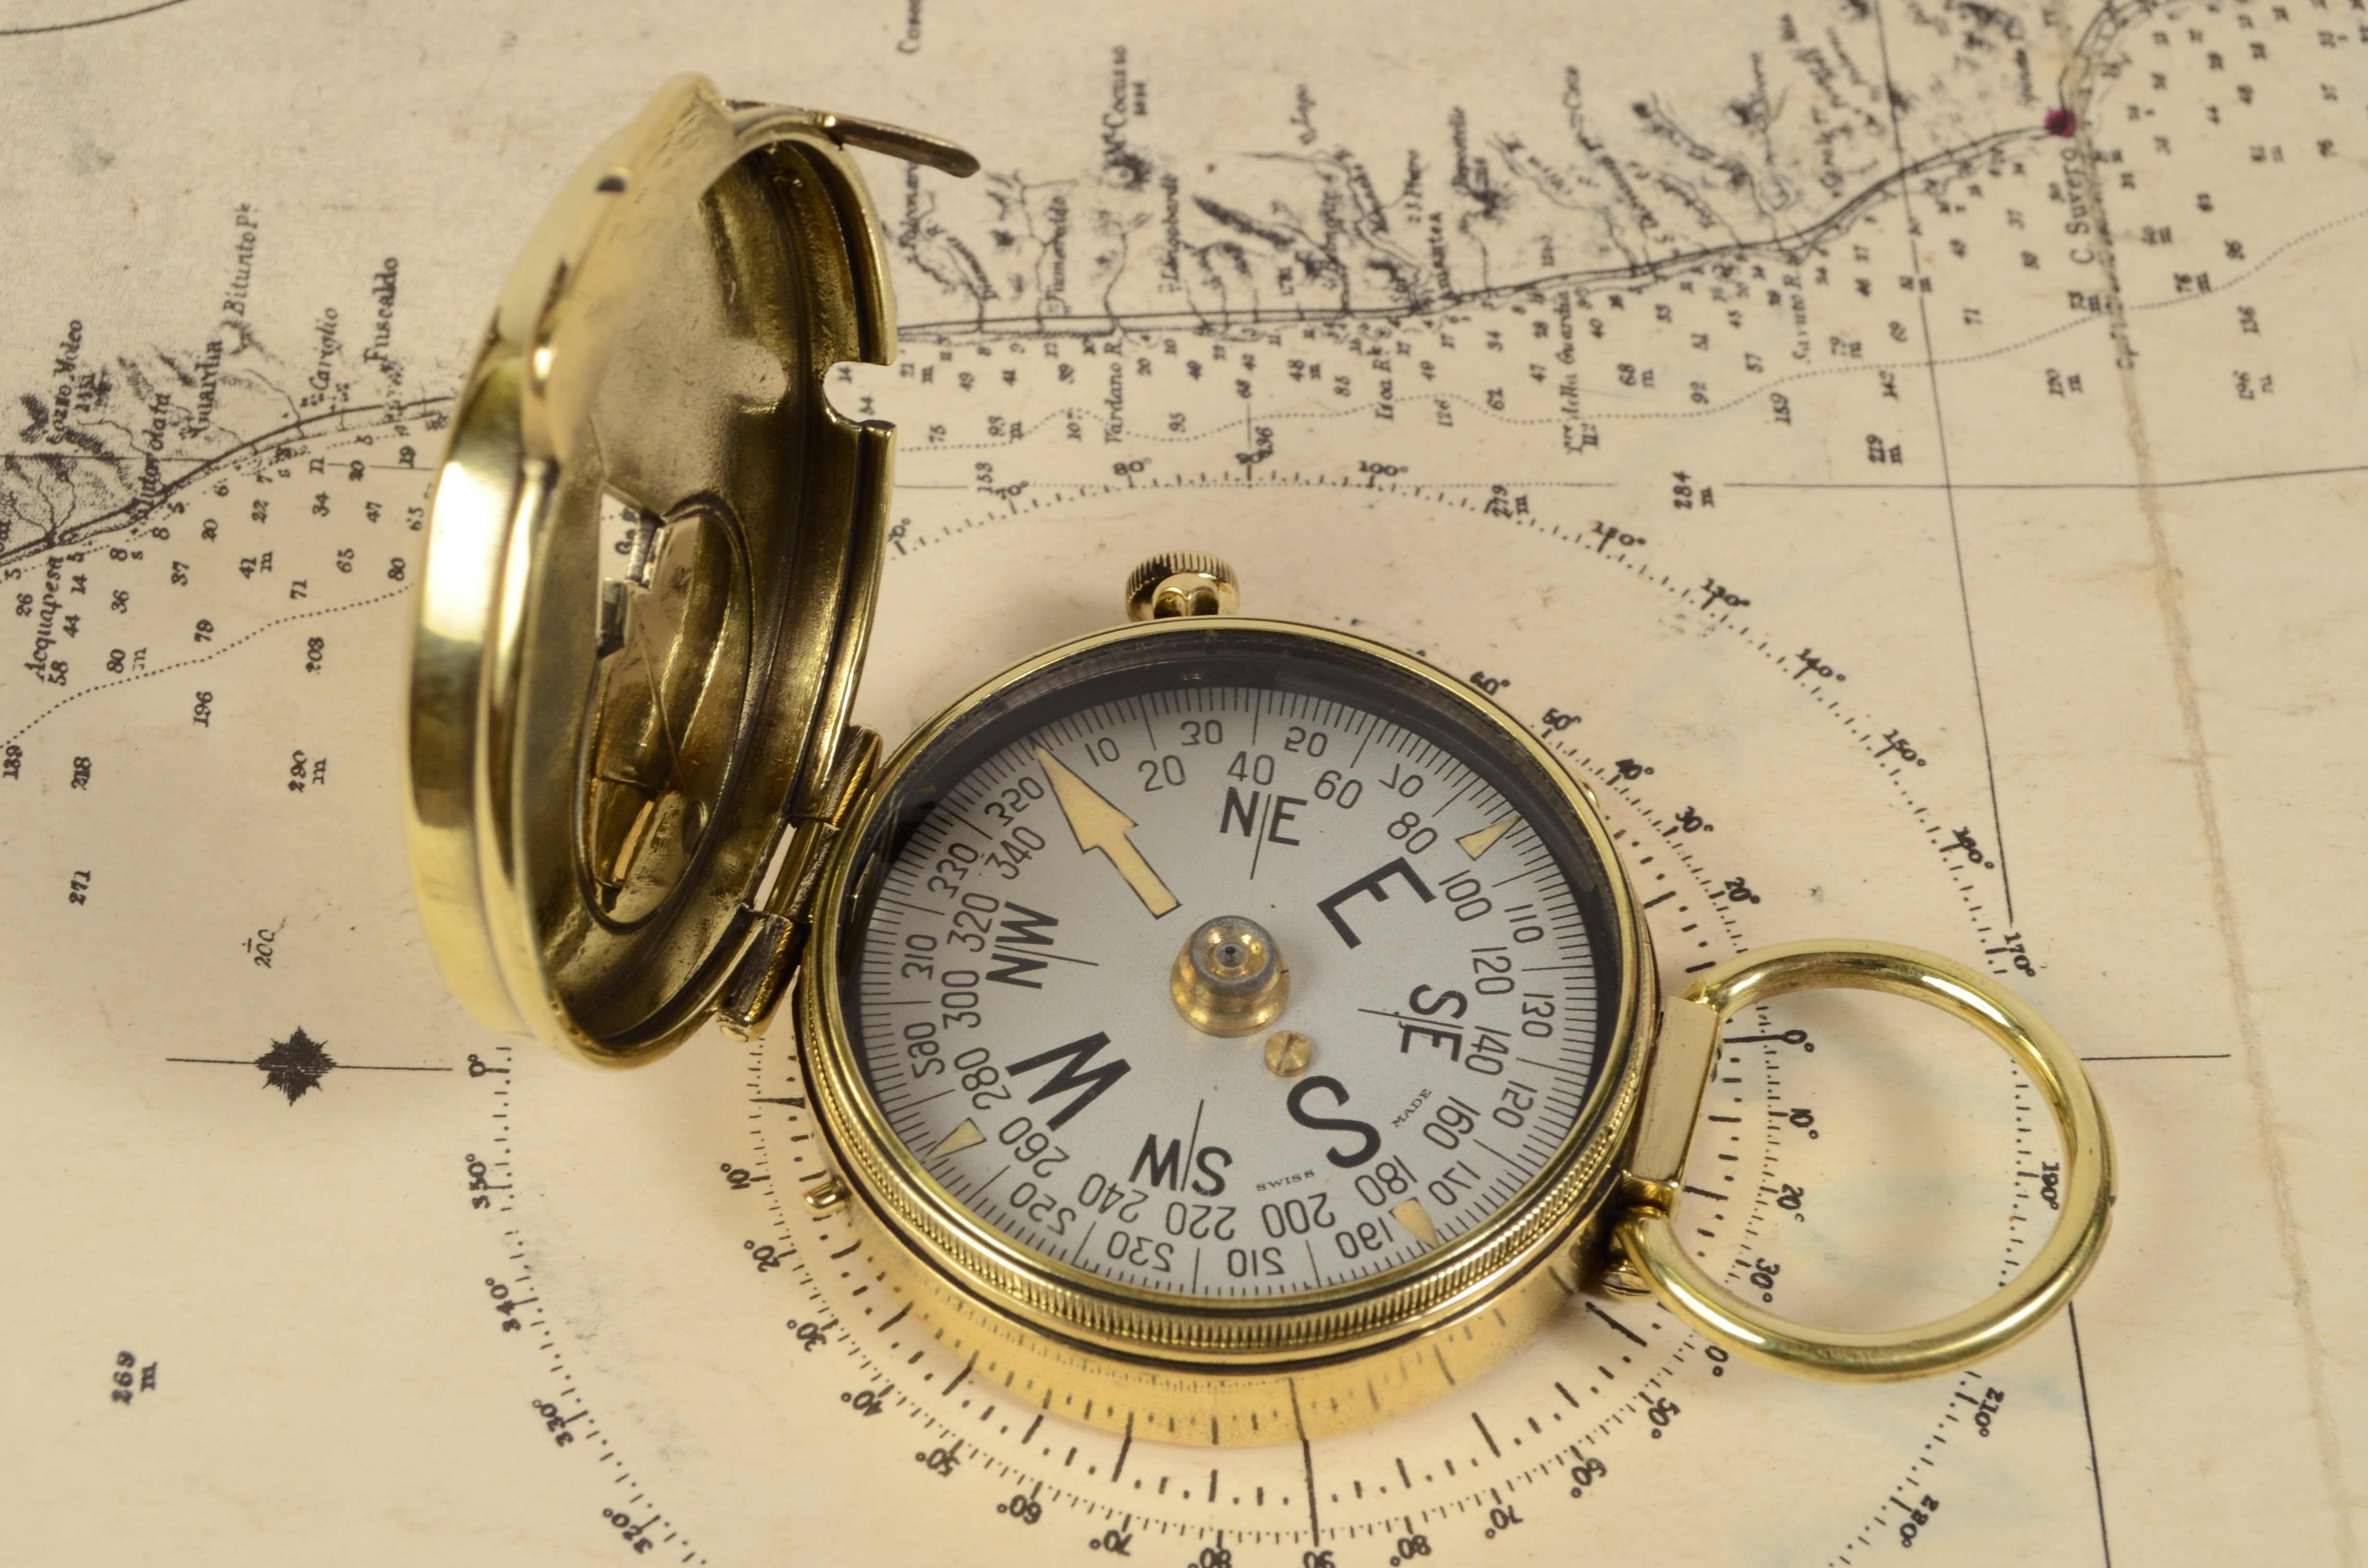 Magnetic brass pocket compass, signed Plan Neuchatel Switzerland n. 94823 from the 1920s and built for the U.S Engineer Corps. It is a compass typically used in recreational sailing, therefore on boats less subject to magnetic deviation.
It can